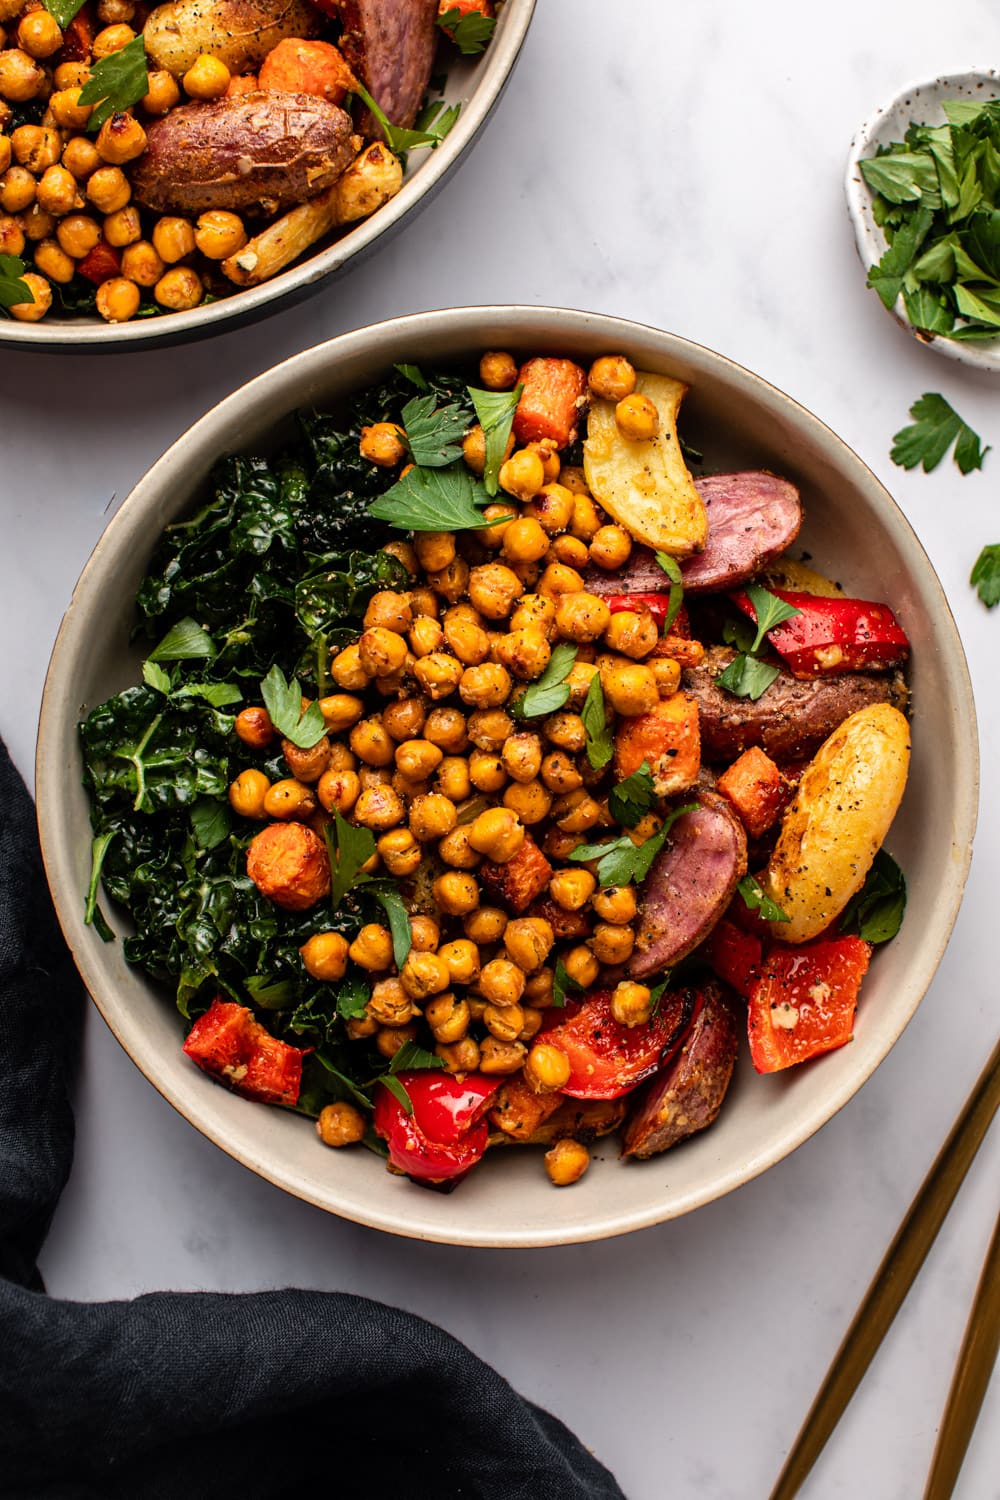 veggies, chickpeas and salad served in a white bowl